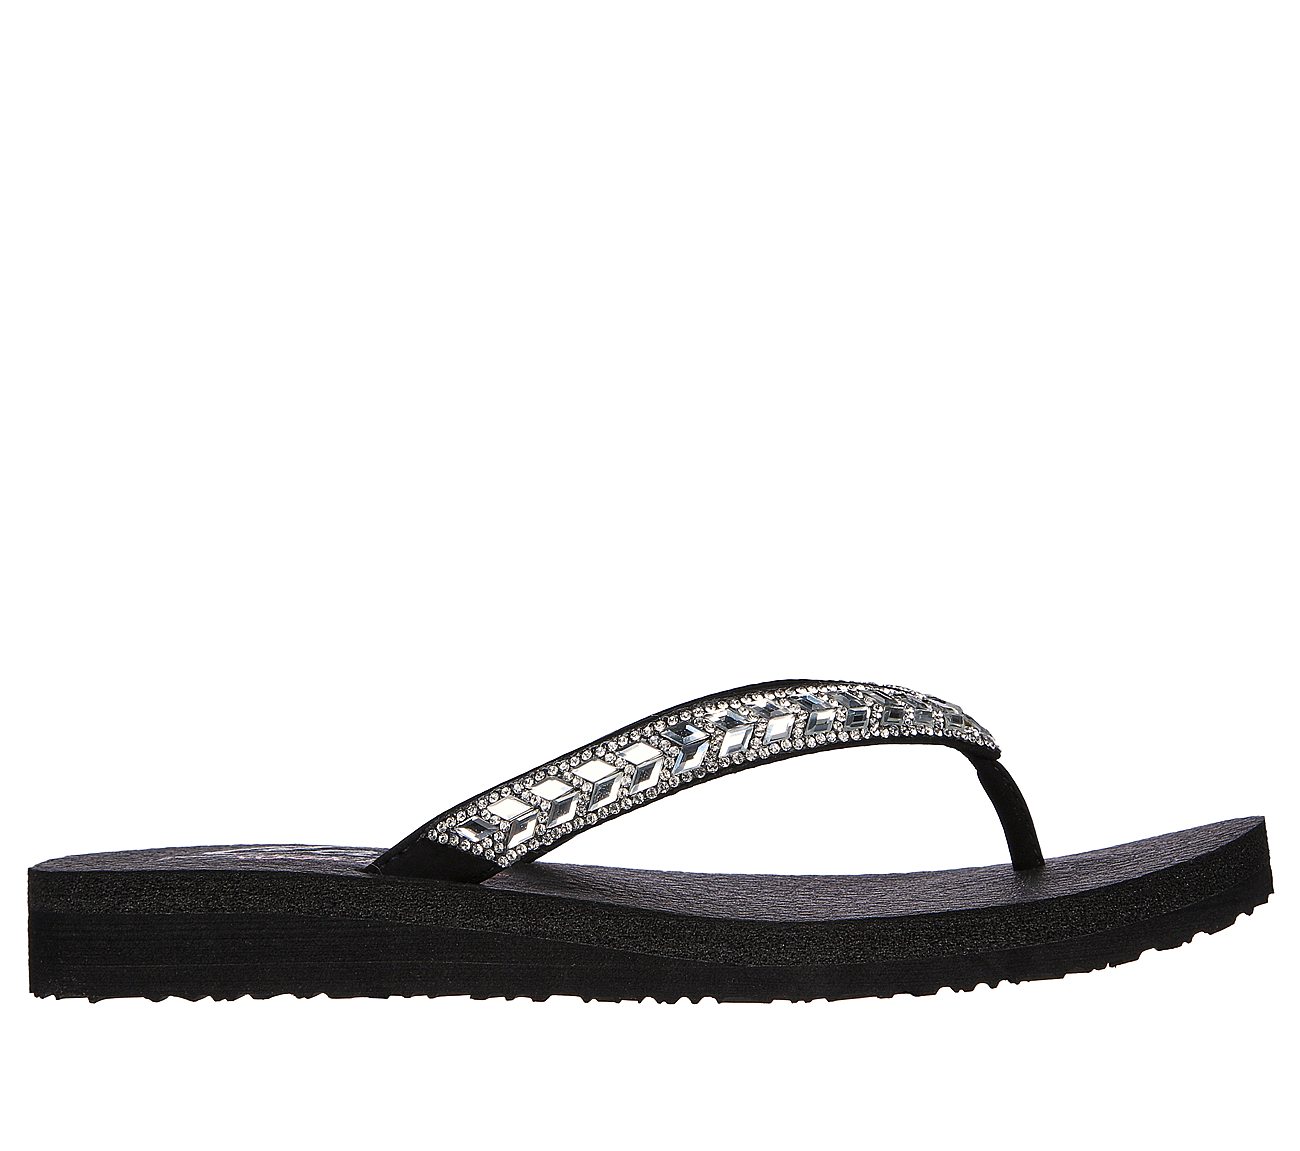 MEDITATION - CLEAR WATERS, BLACK/SILVER Footwear Lateral View